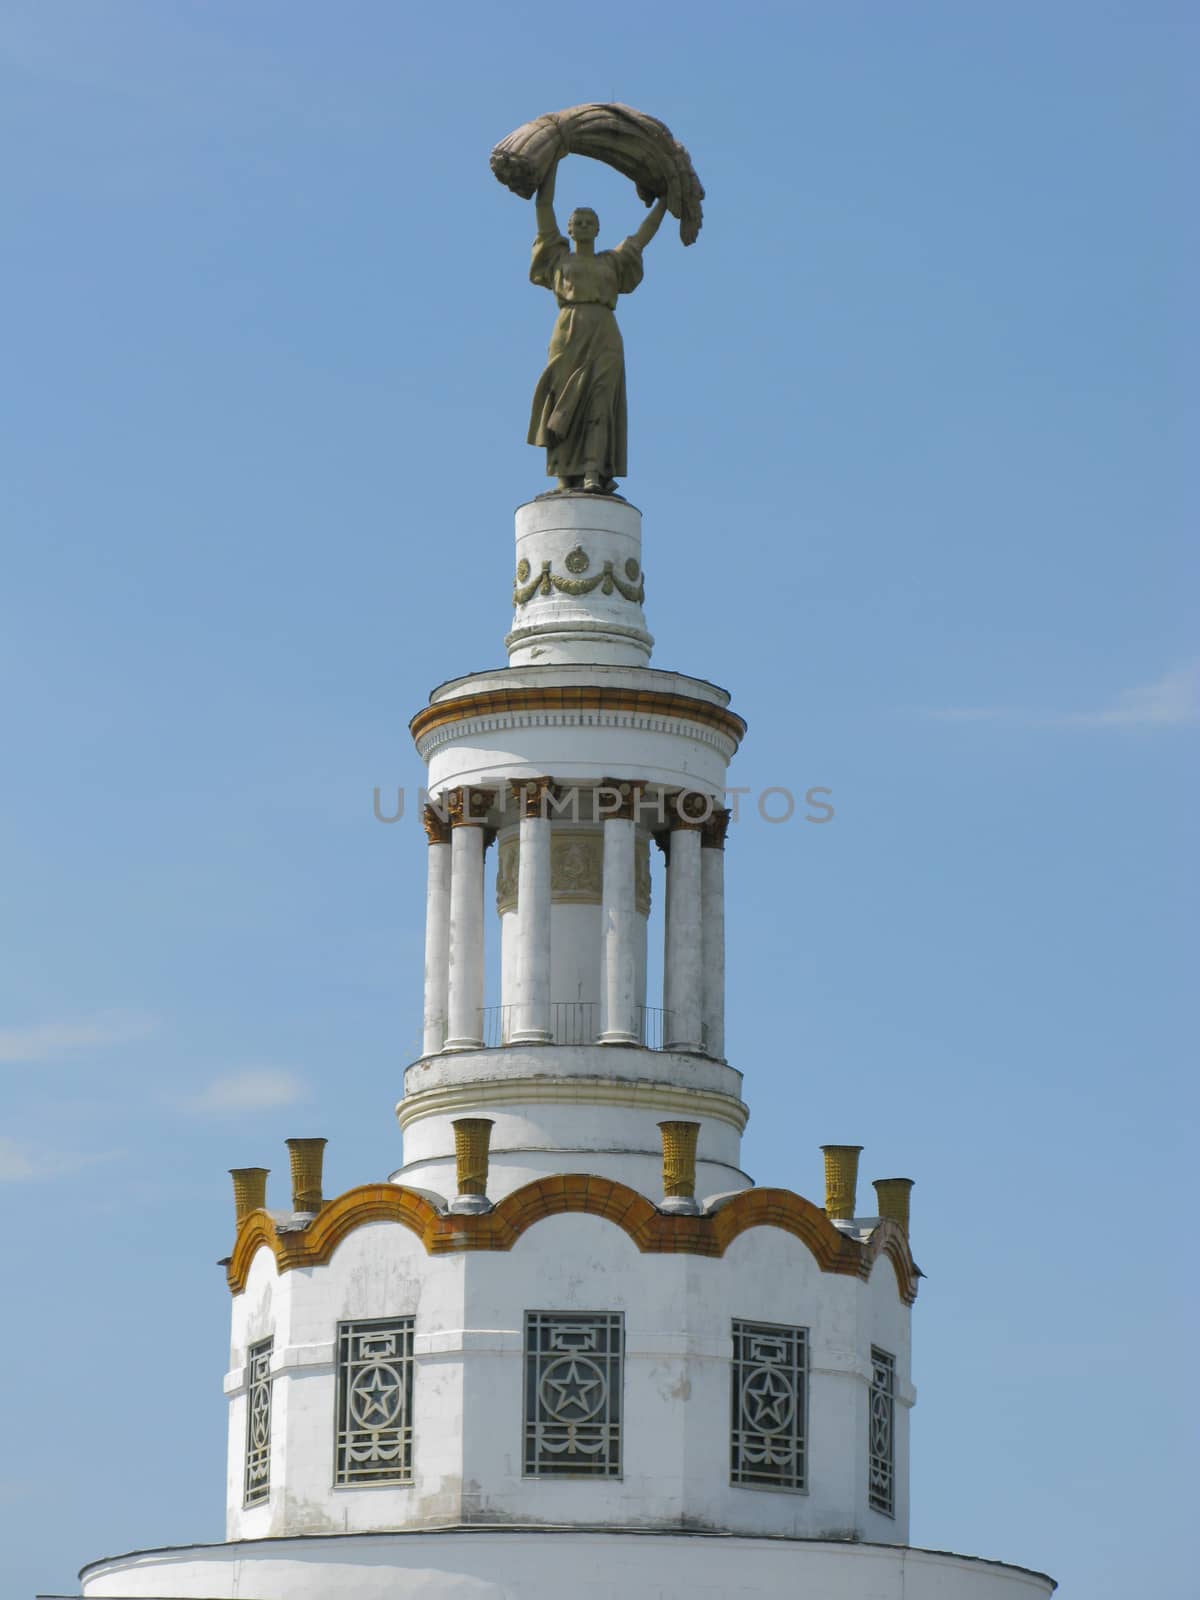 The monument on which is depicted a woman with a stack of wheat. Symbol of harvest and bread as the main gastronomic product